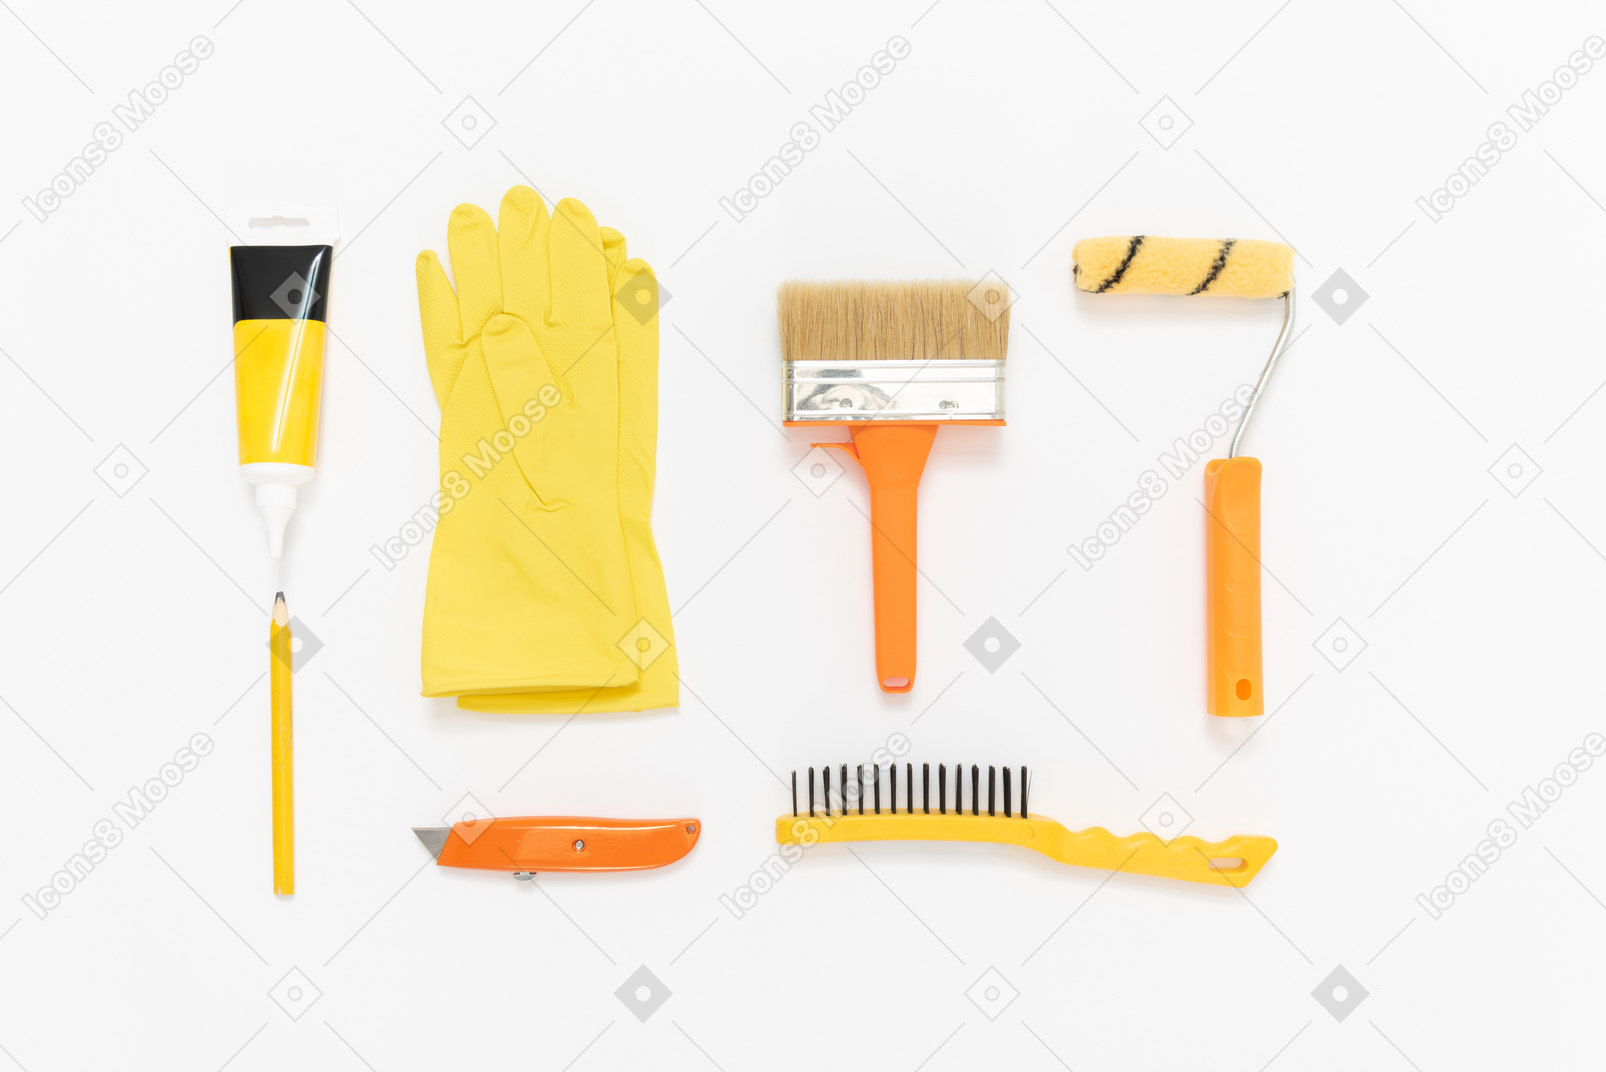 A set of painting tools arranged neatly on the white background